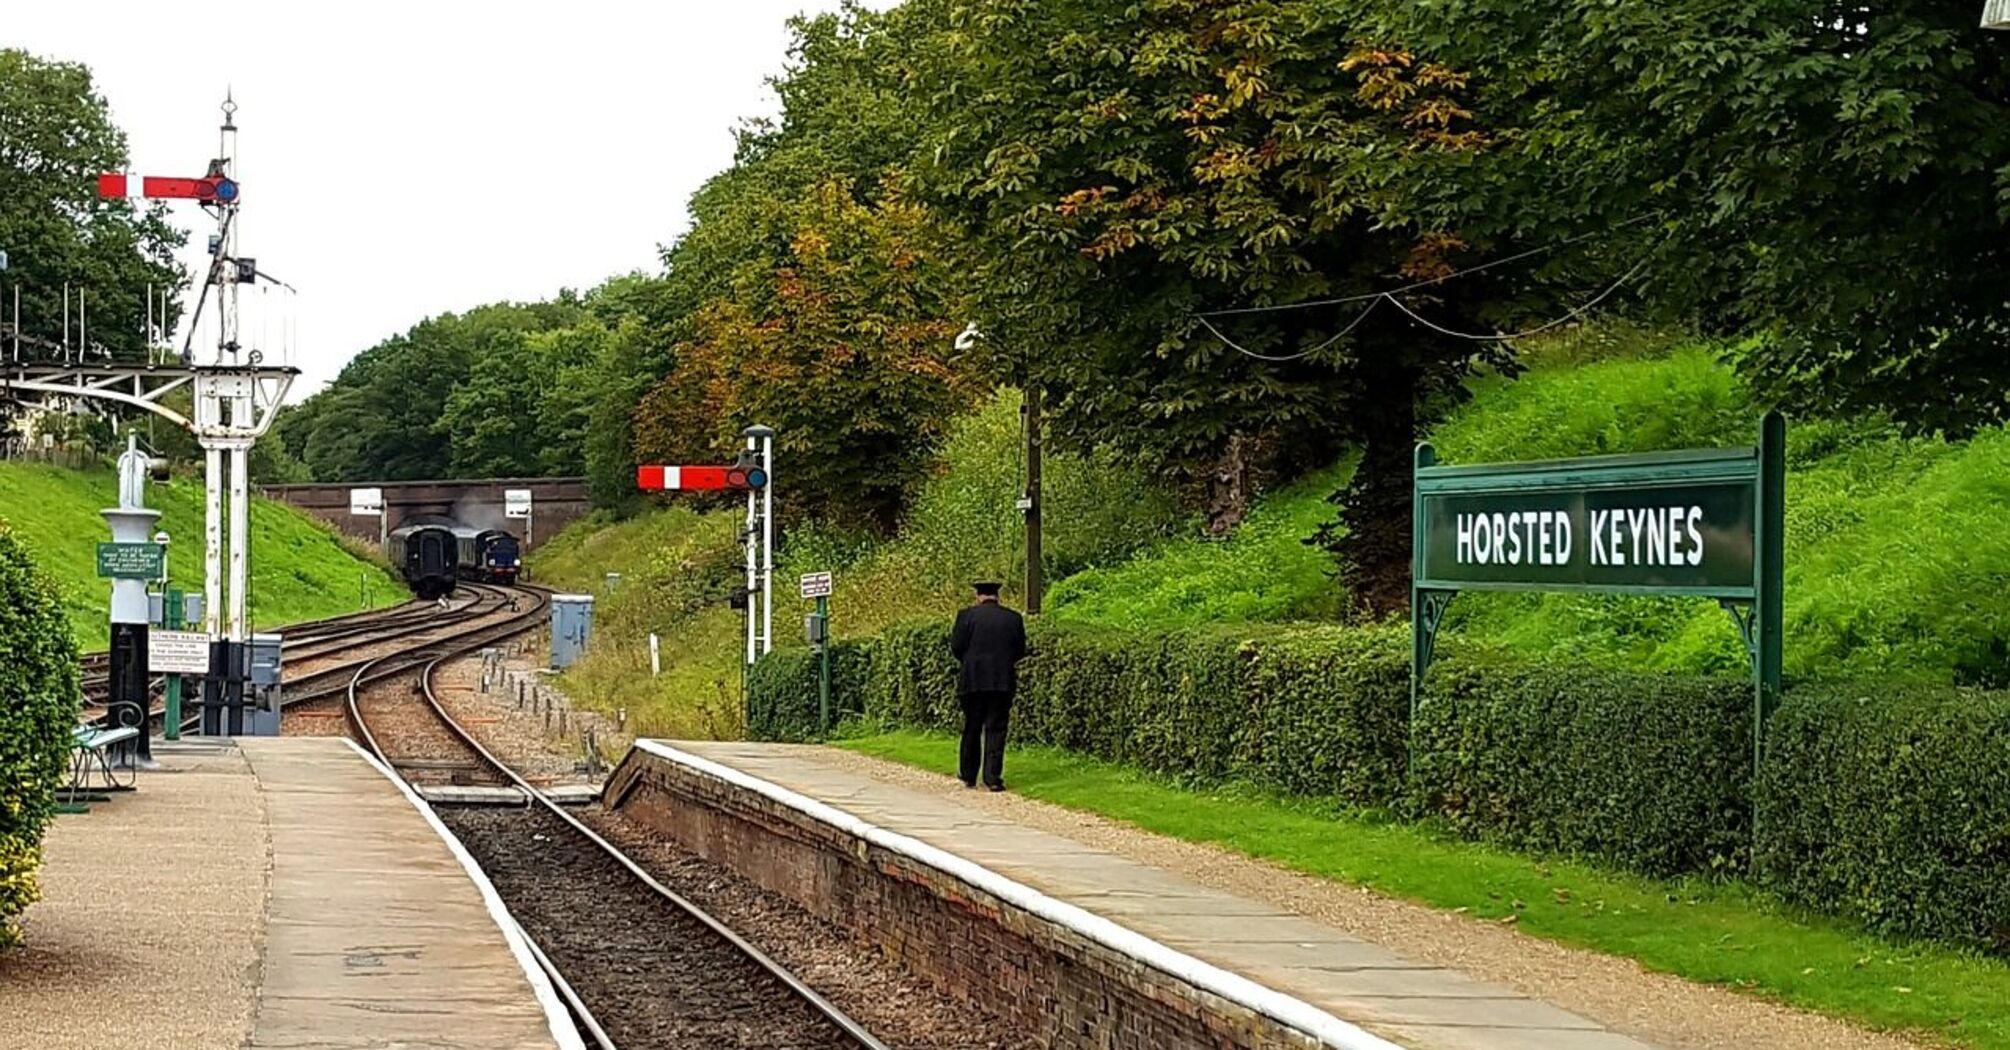 In England, residents are asked to help correct railway station names